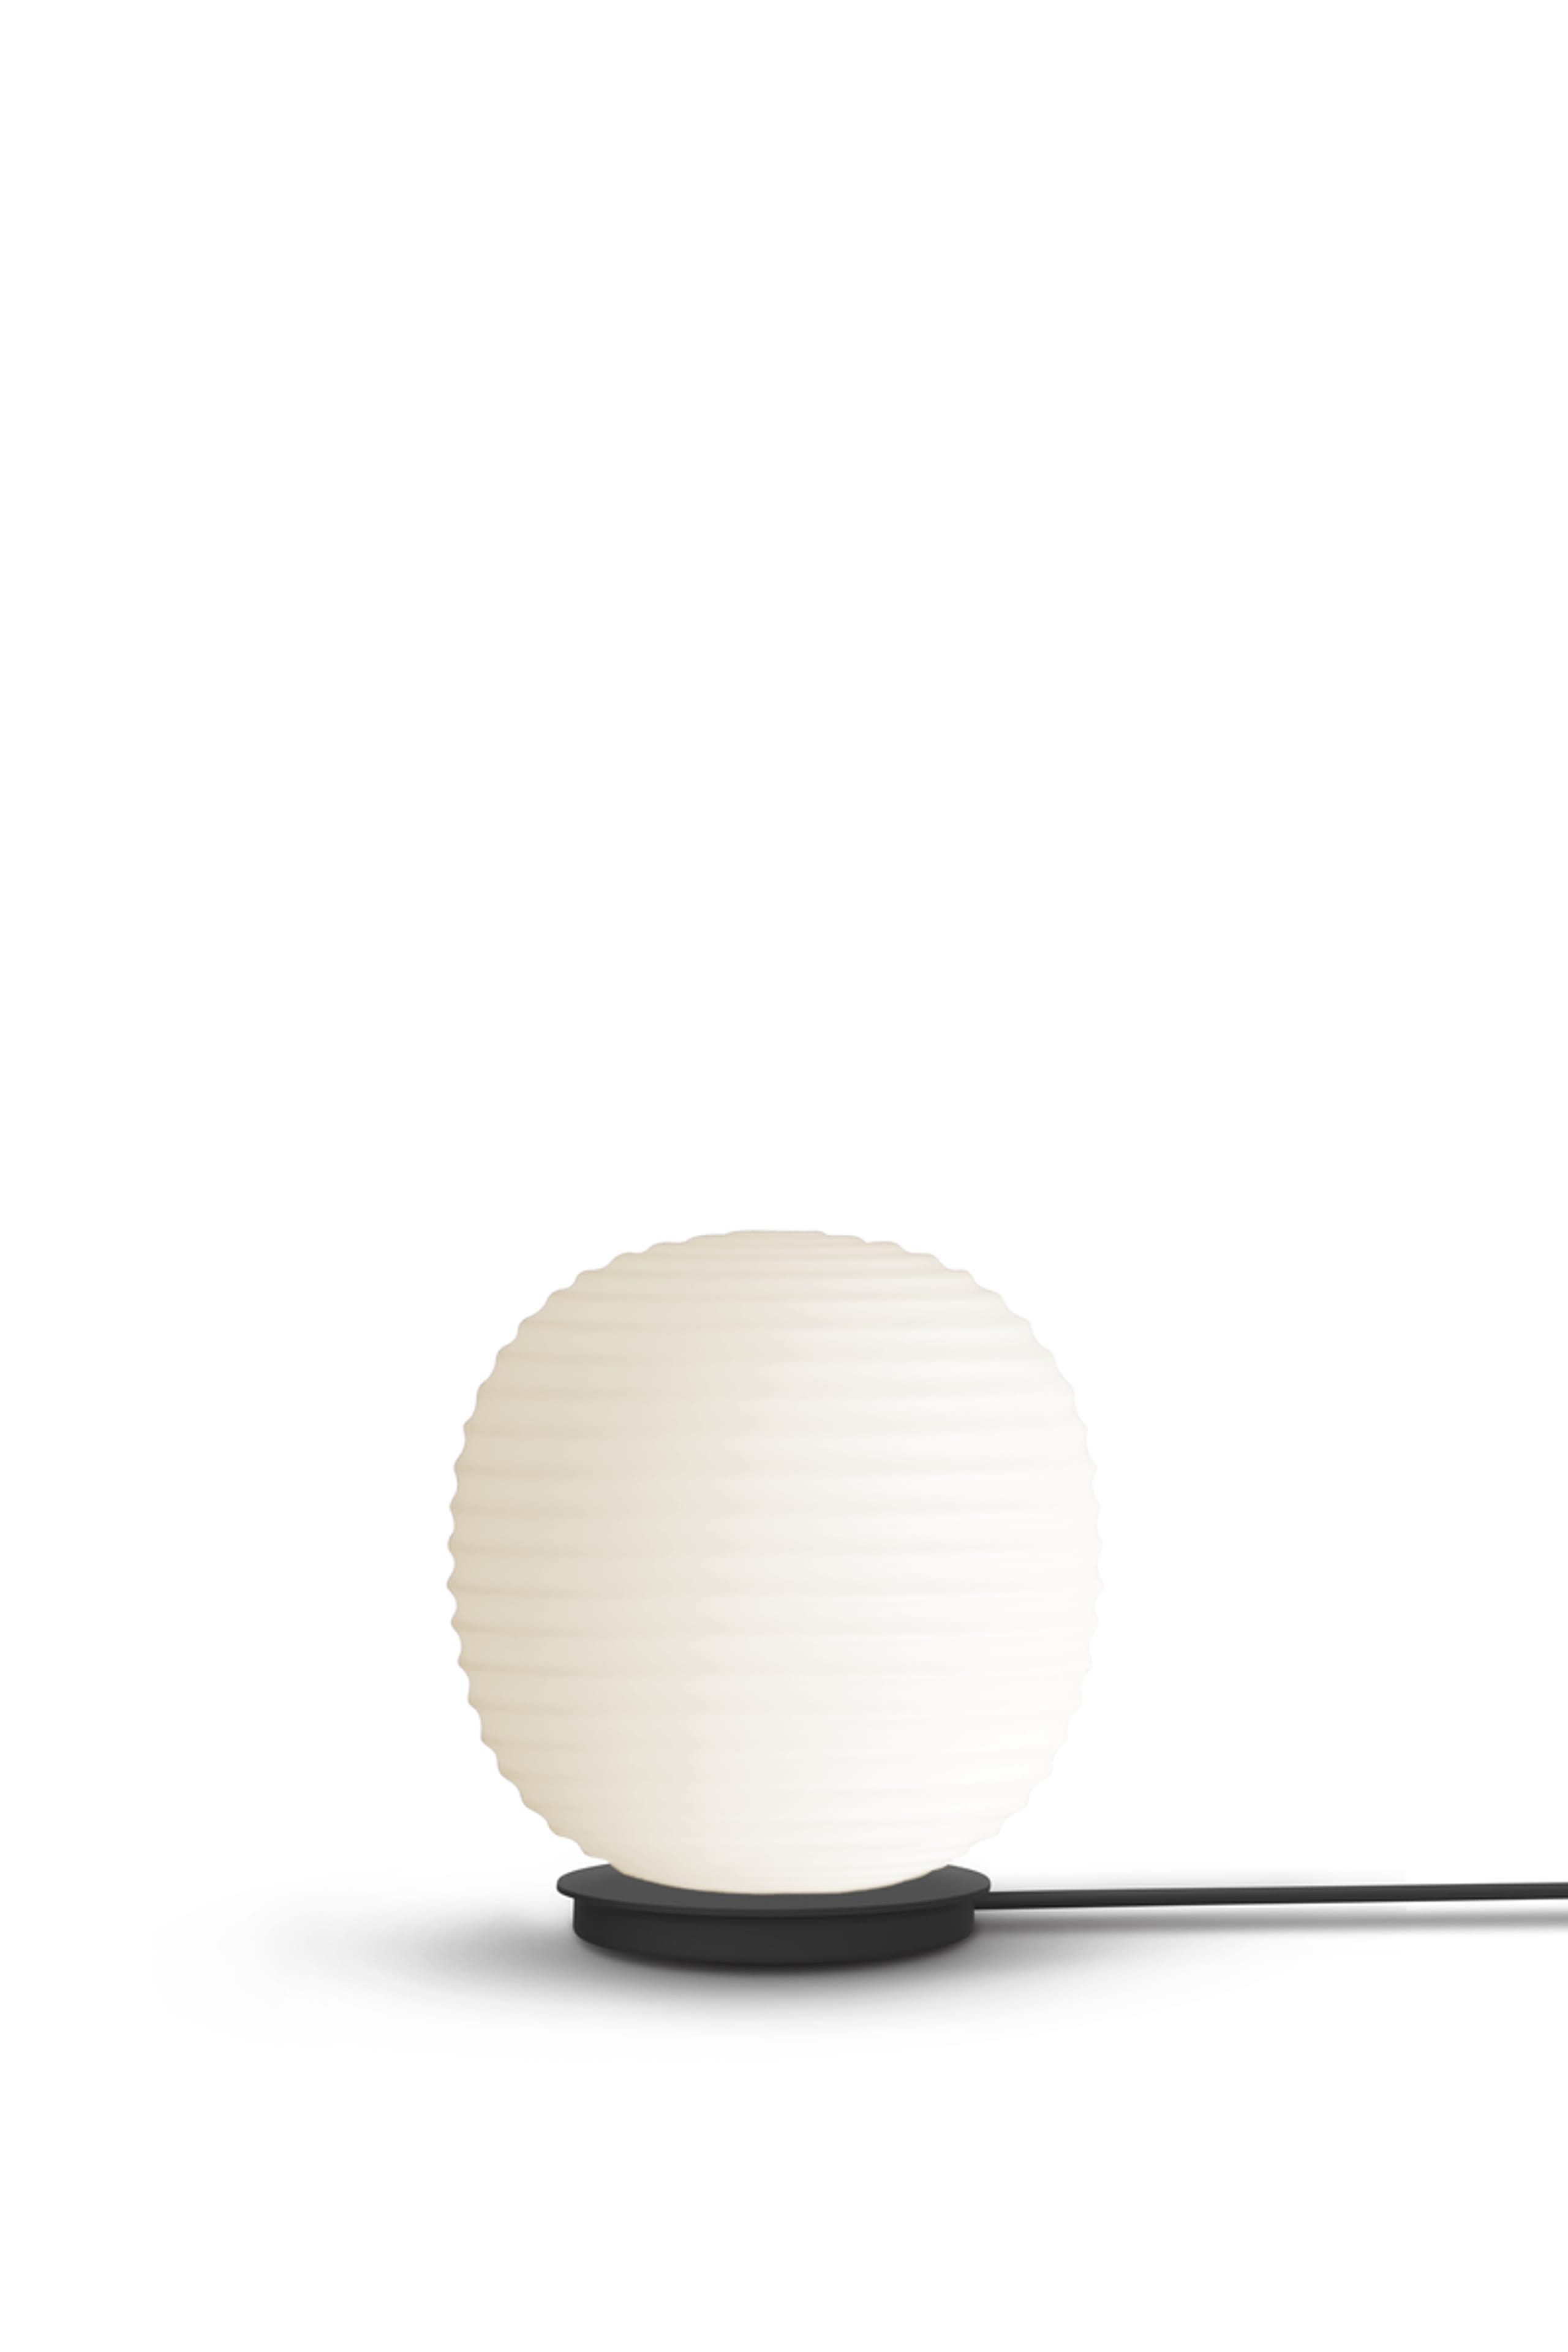 New Works - Candeeiro de mesa - Lantern Globe Table Lamp - Black Base w. Frosted White Opal Glass Small